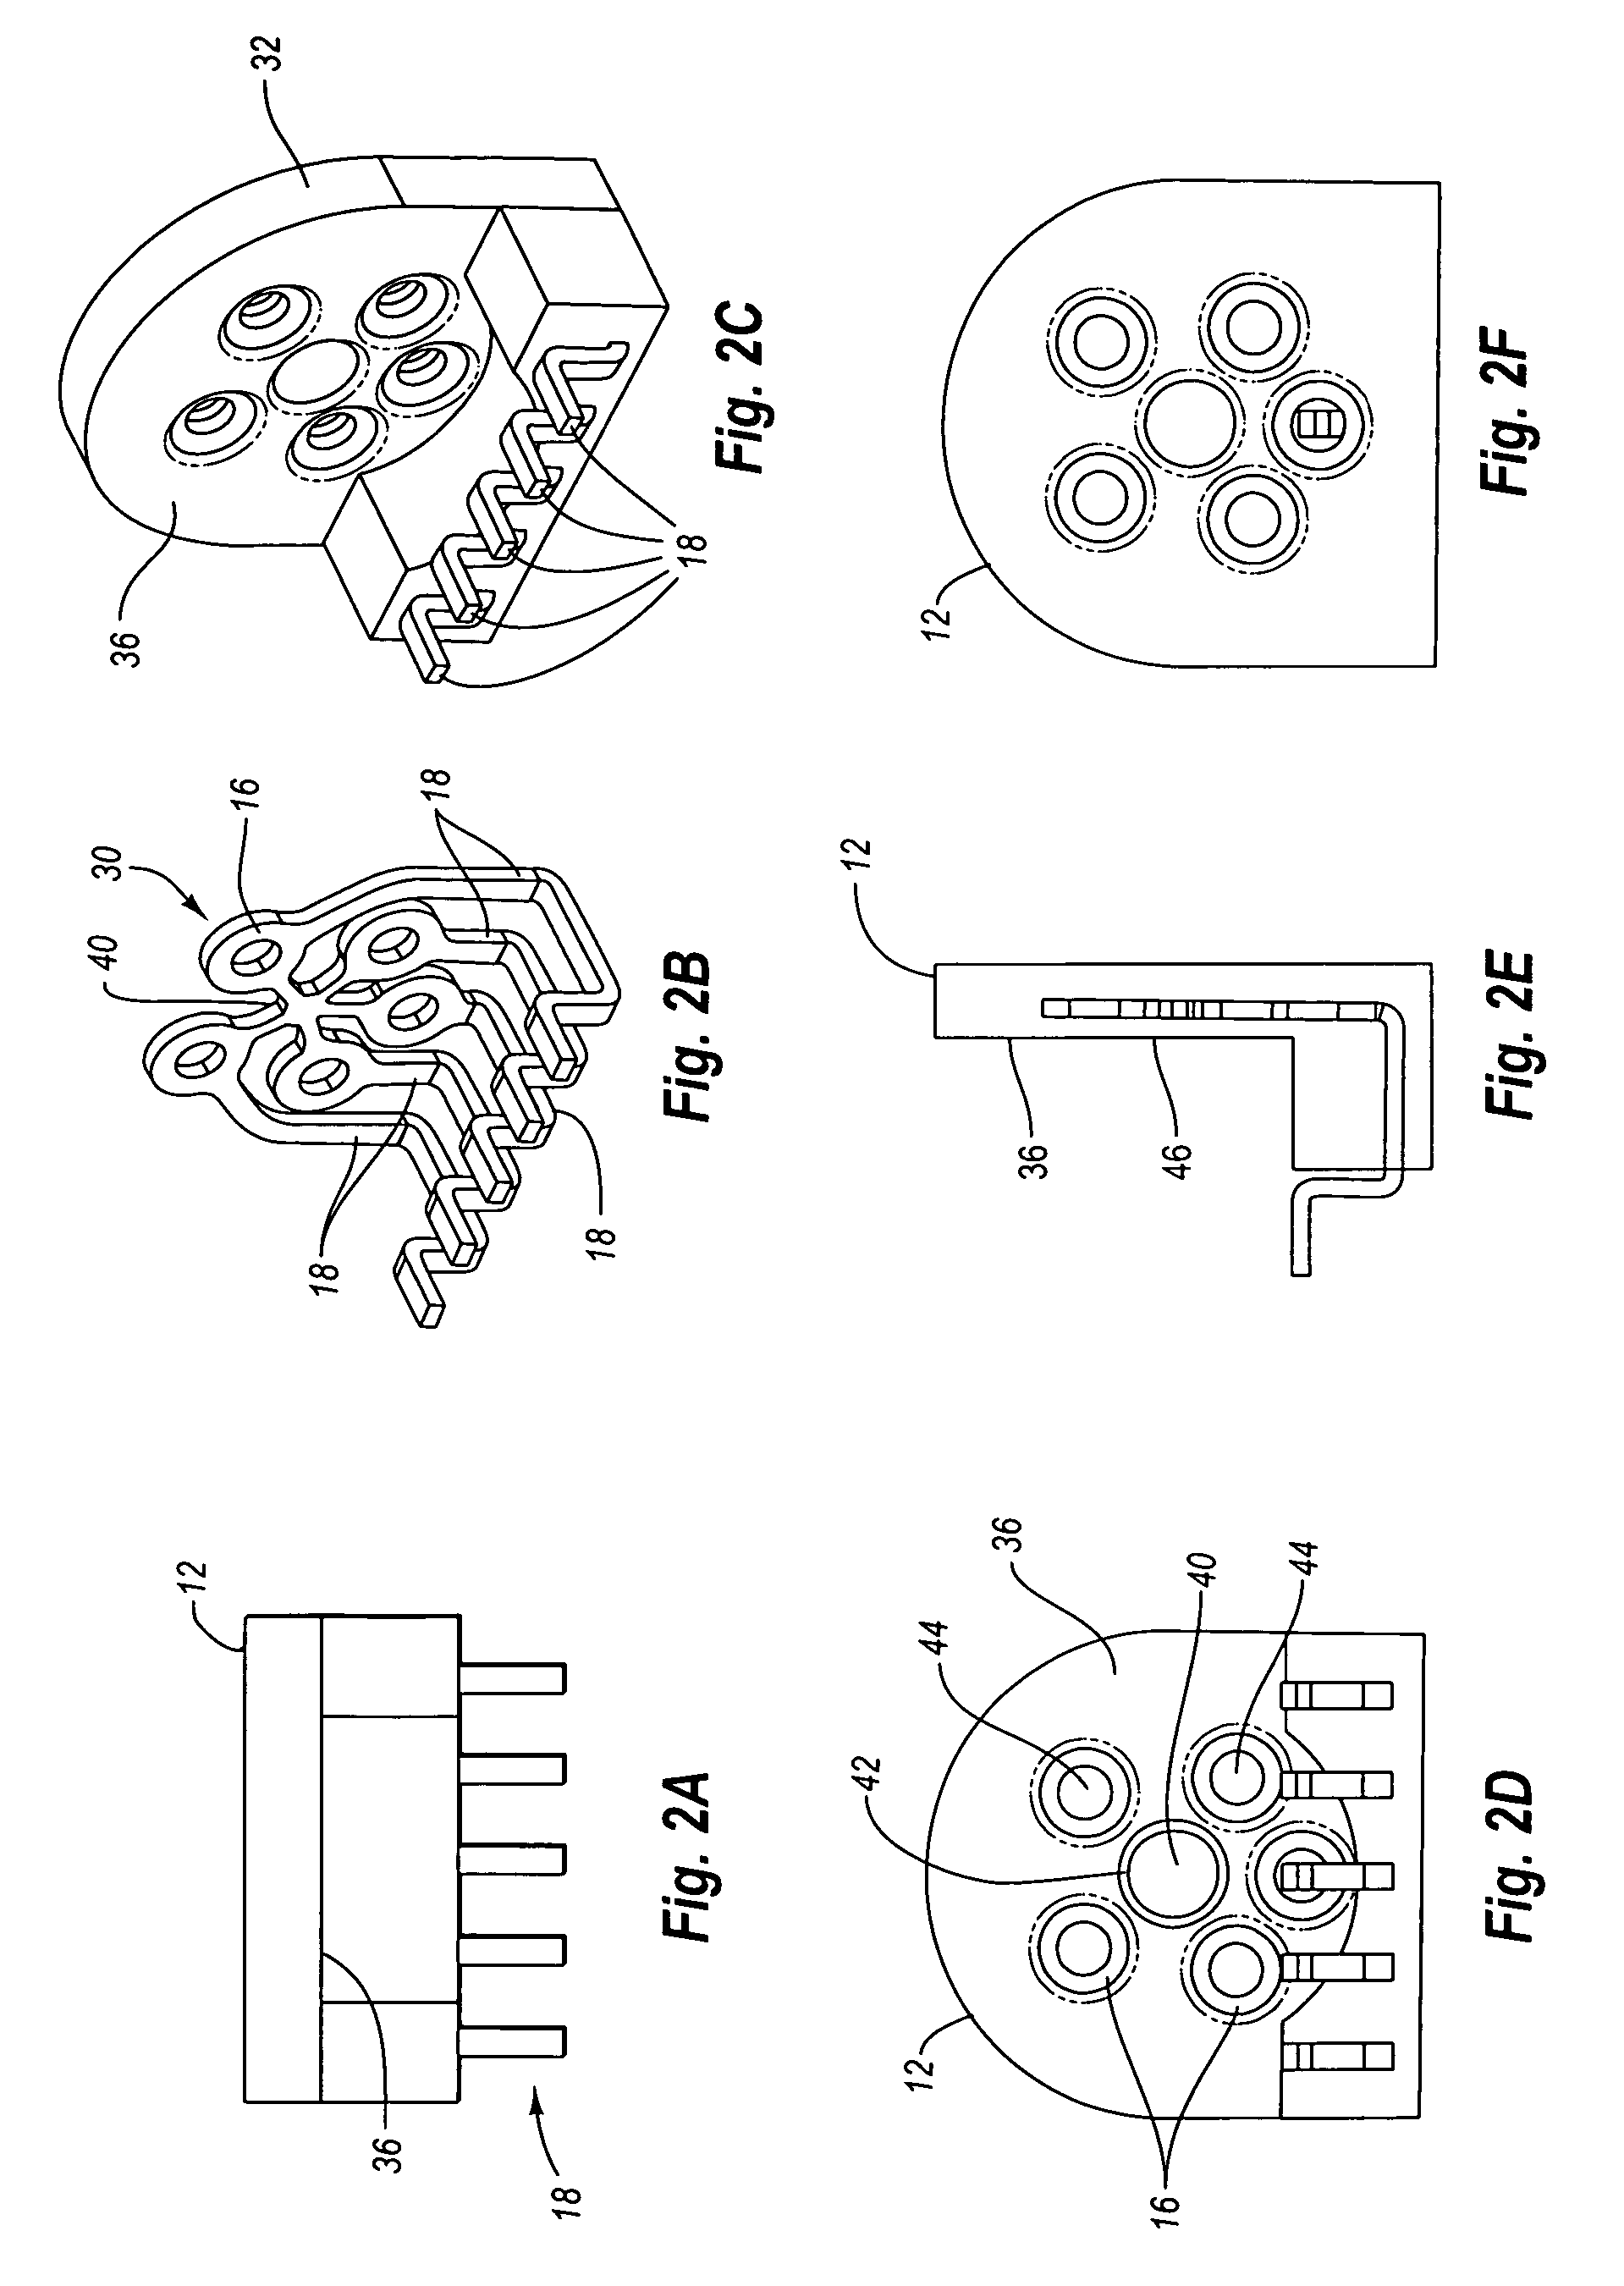 Methods for manufacturing optical modules having an optical sub-assembly